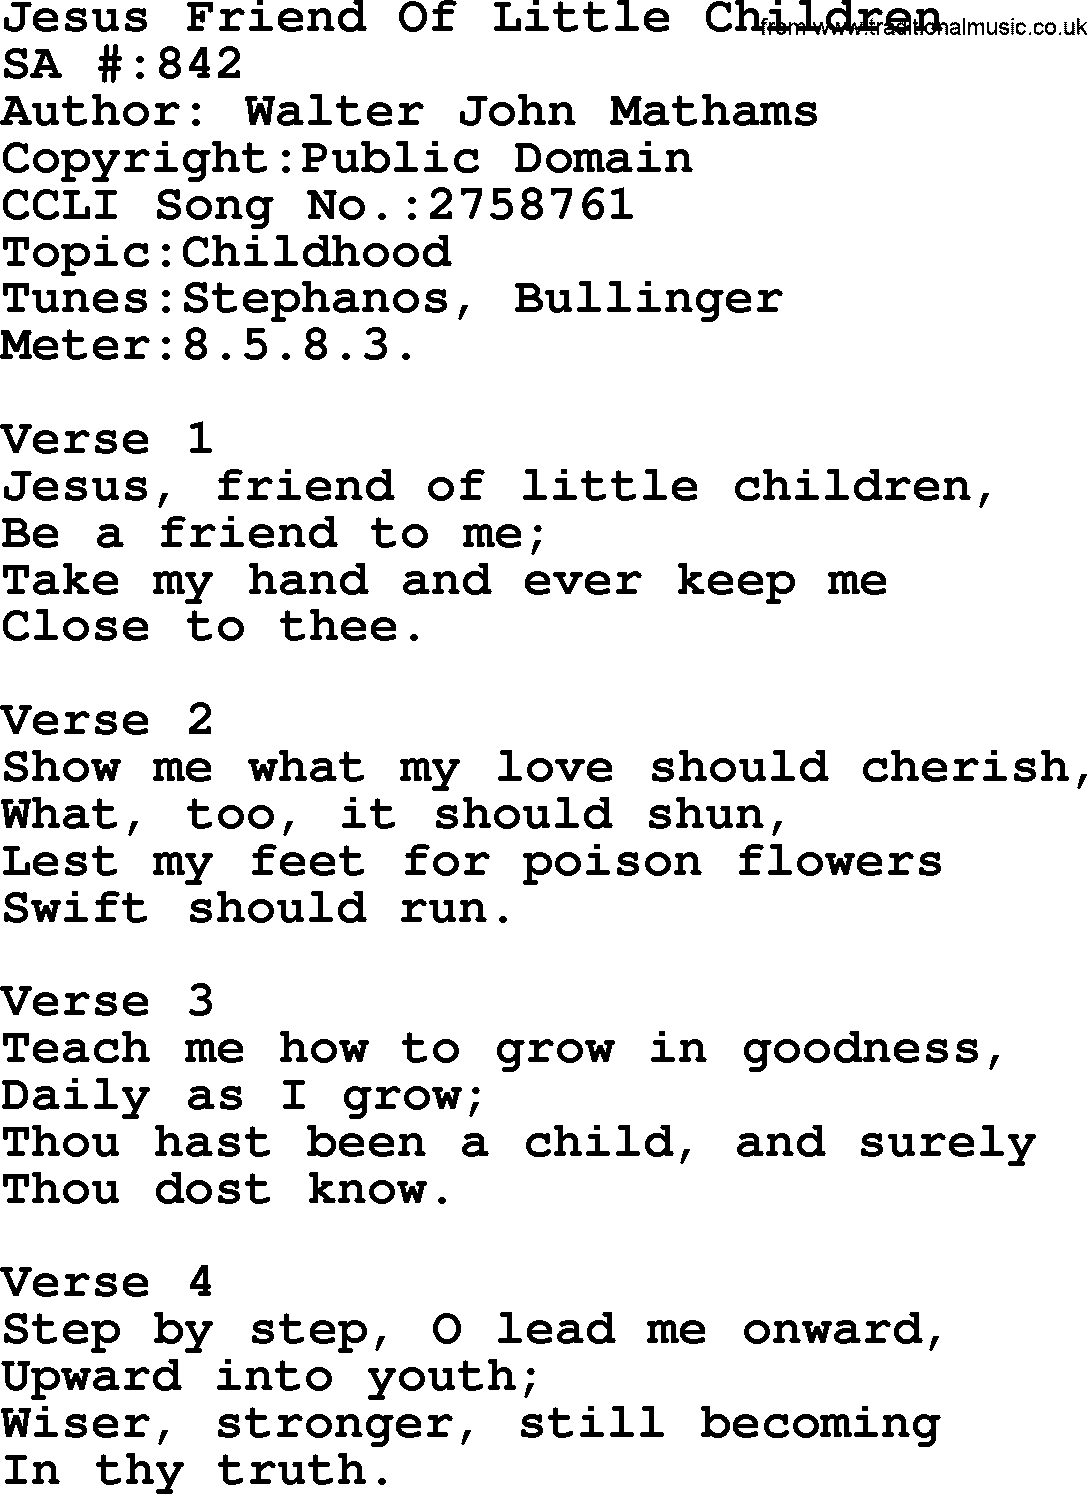 Salvation Army Hymnal, title: Jesus Friend Of Little Children, with lyrics and PDF,